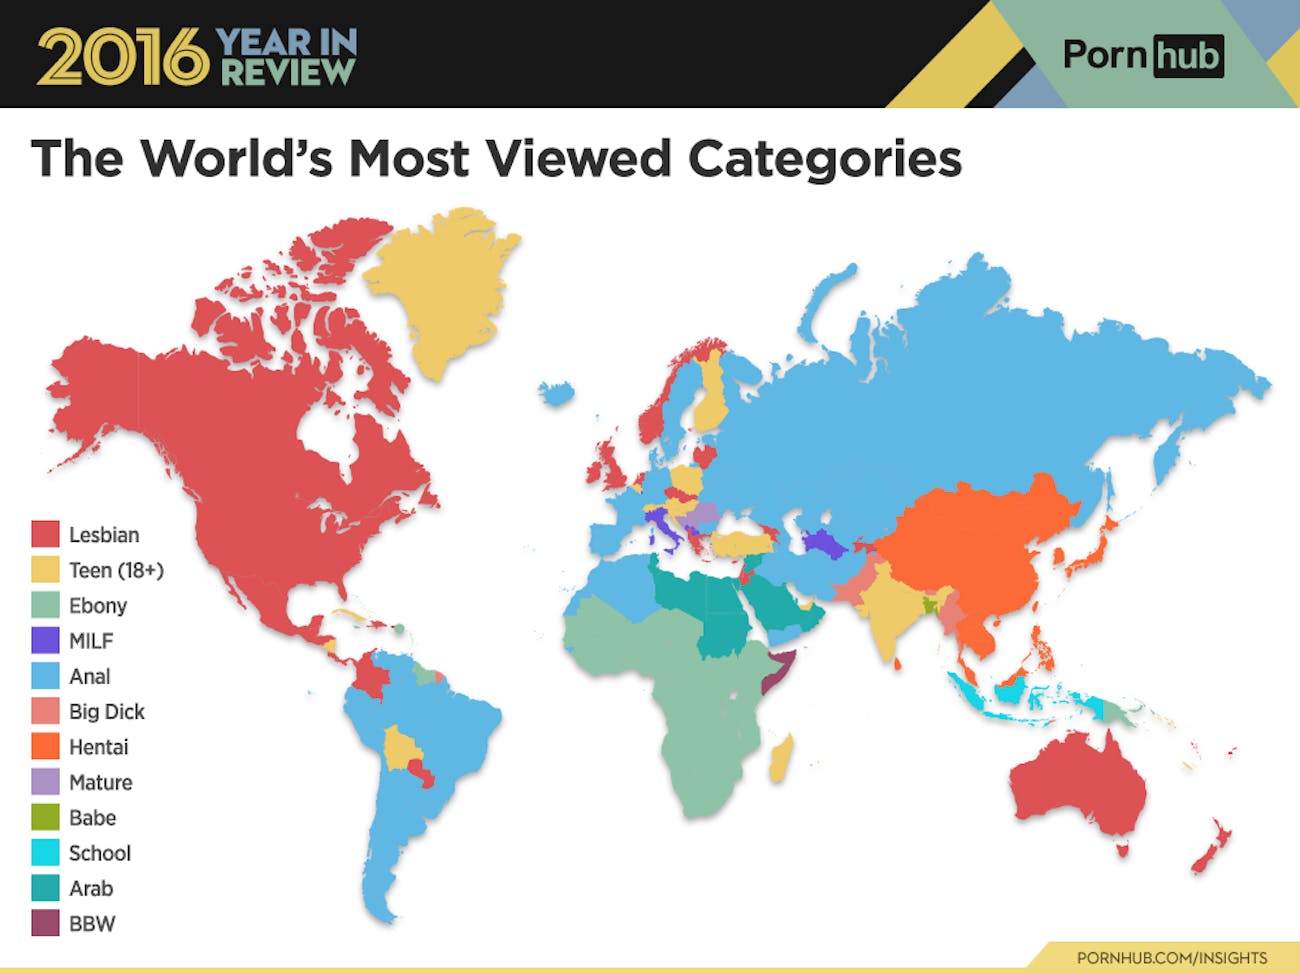 Lesbian Hentai Bbw - Pornhub Released a Detailed Map of the World's Porn ...